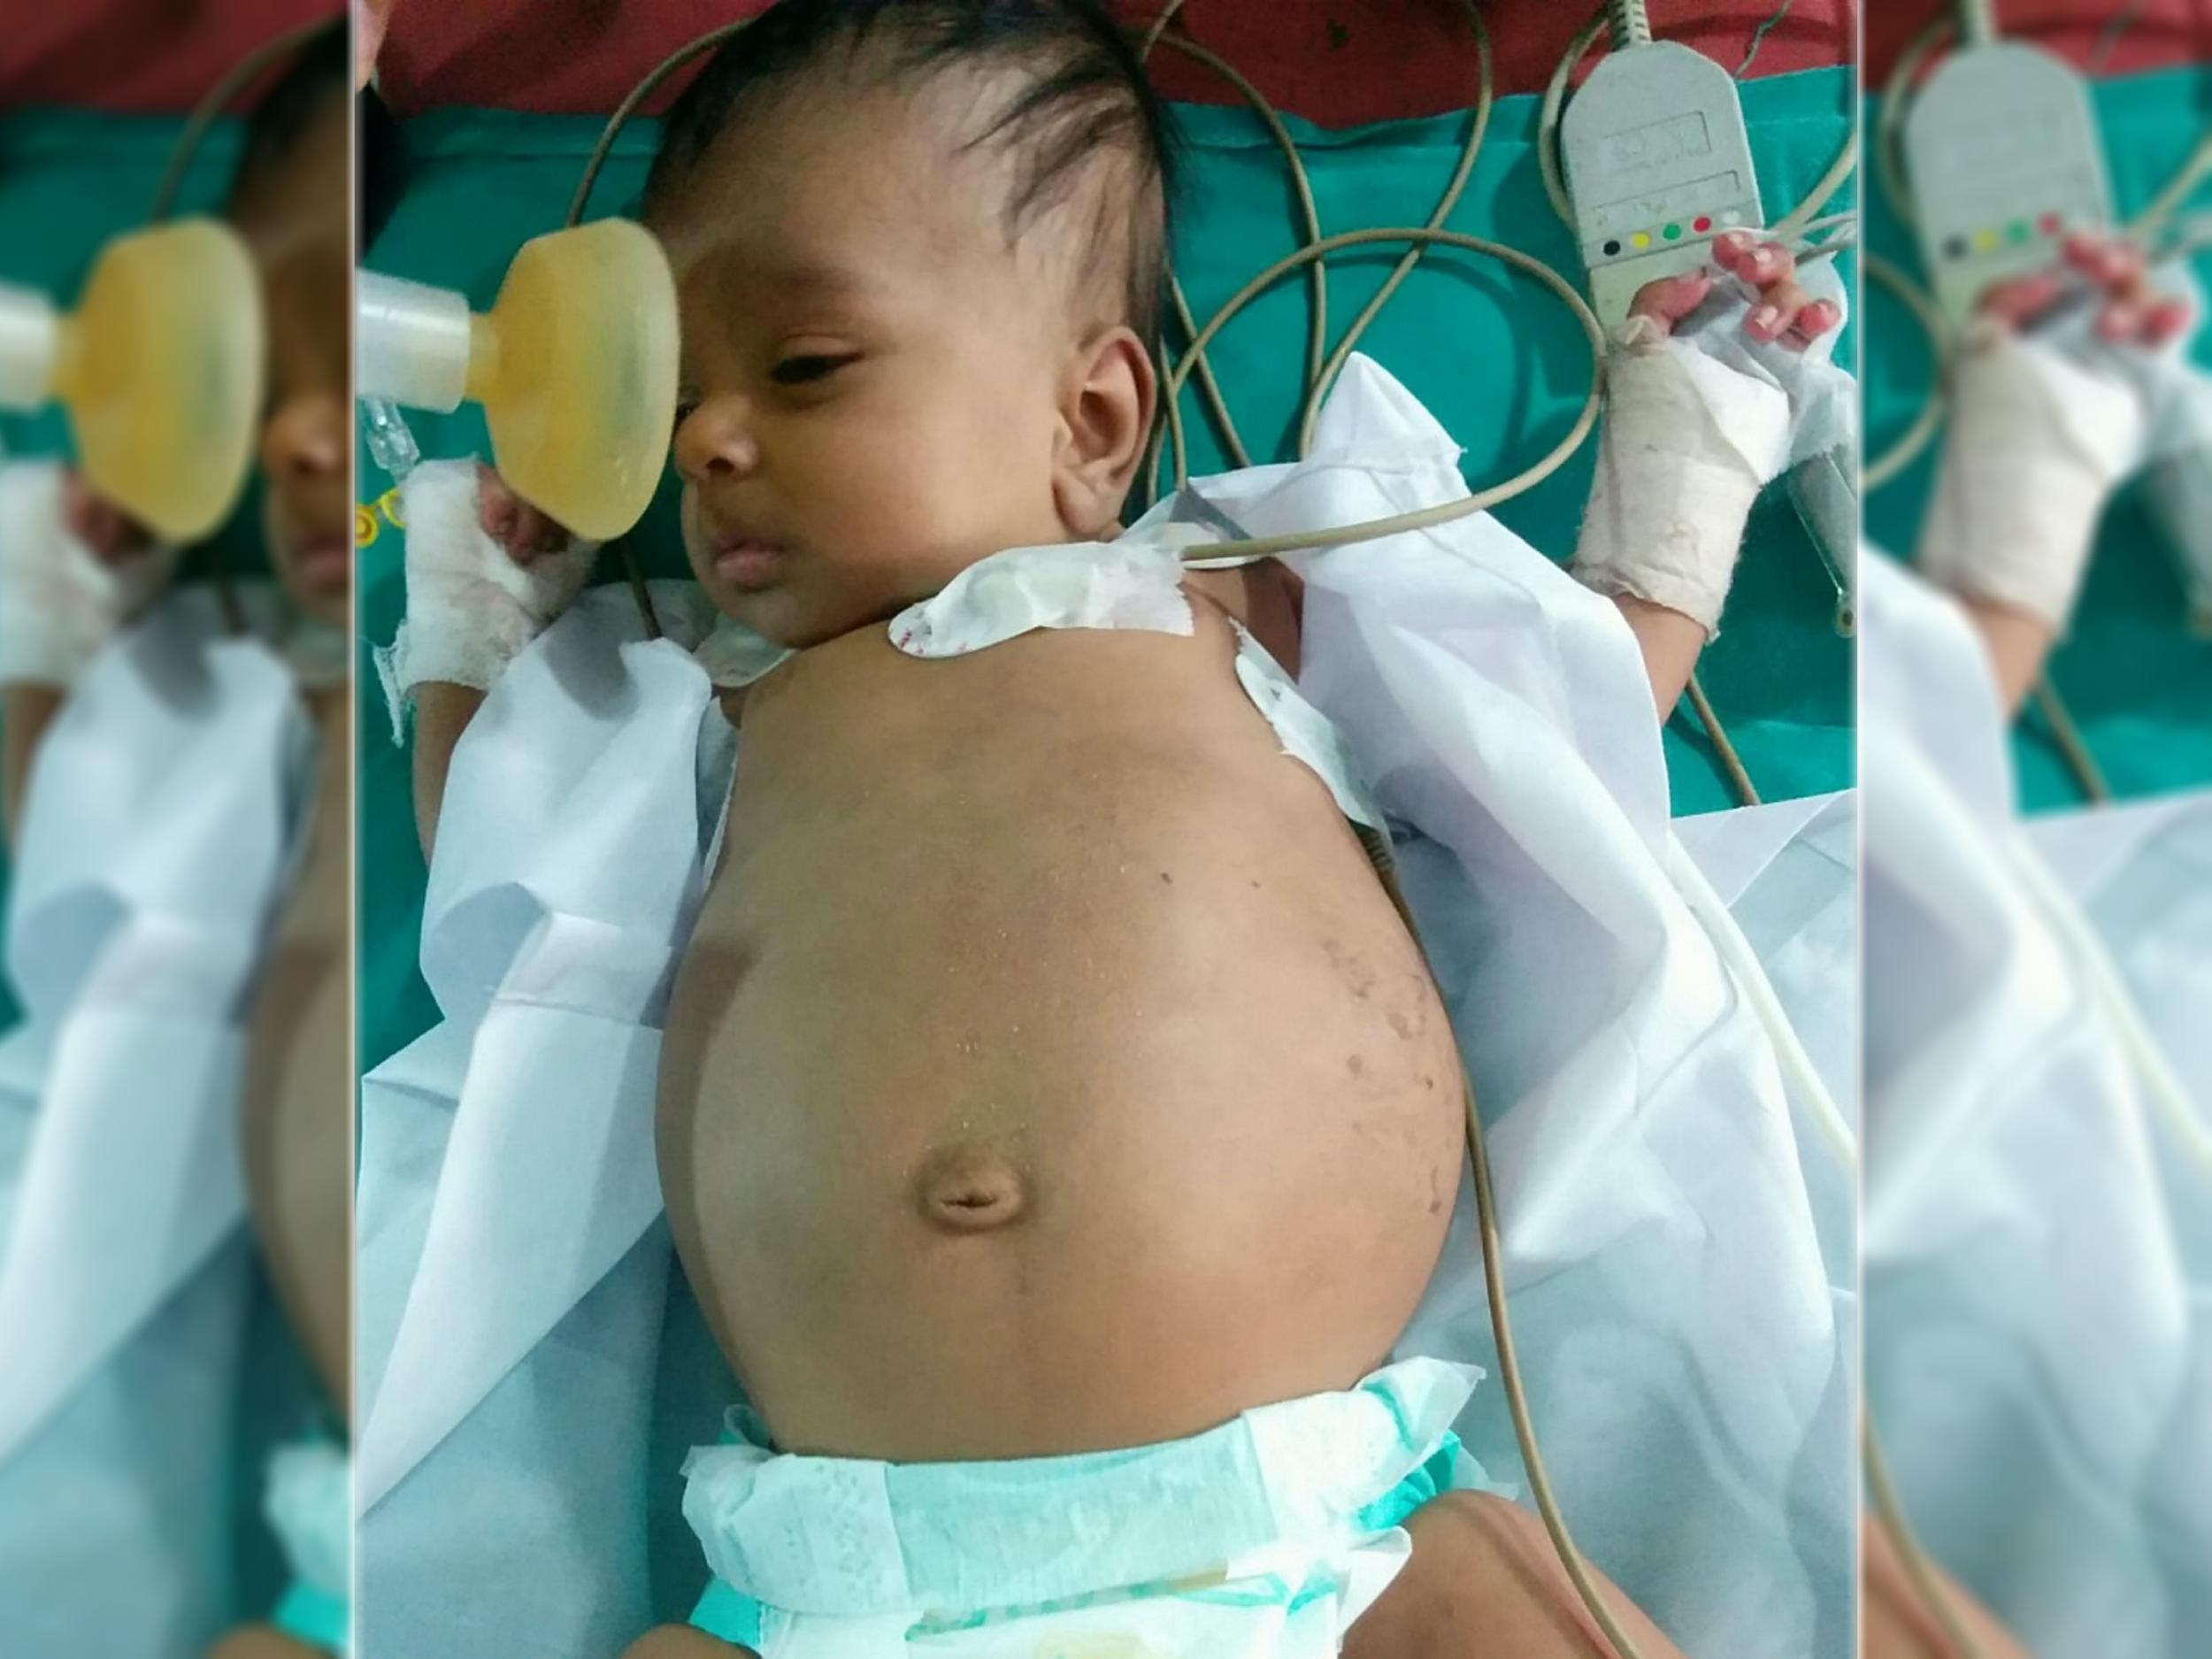 Parents of a three-month-old baby previously diagnosed with "a kidney tumour" were shocked when the doctors told them that there was a foetus of the toddler's twin inside his stomach